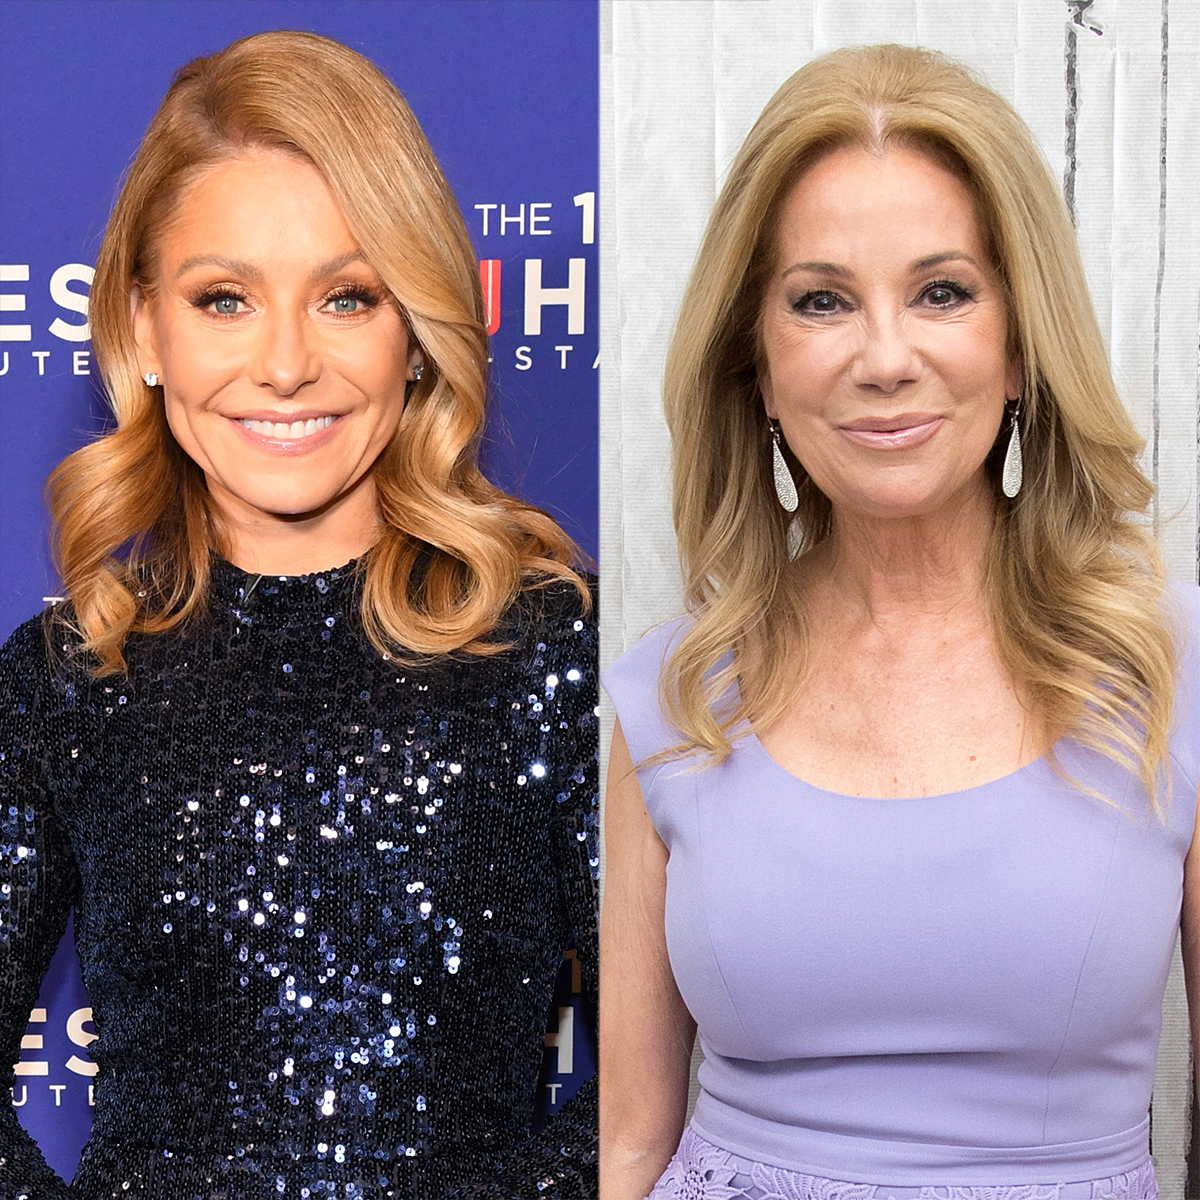 Kathie Lee Gifford News, Pictures, and Videos - E! Online